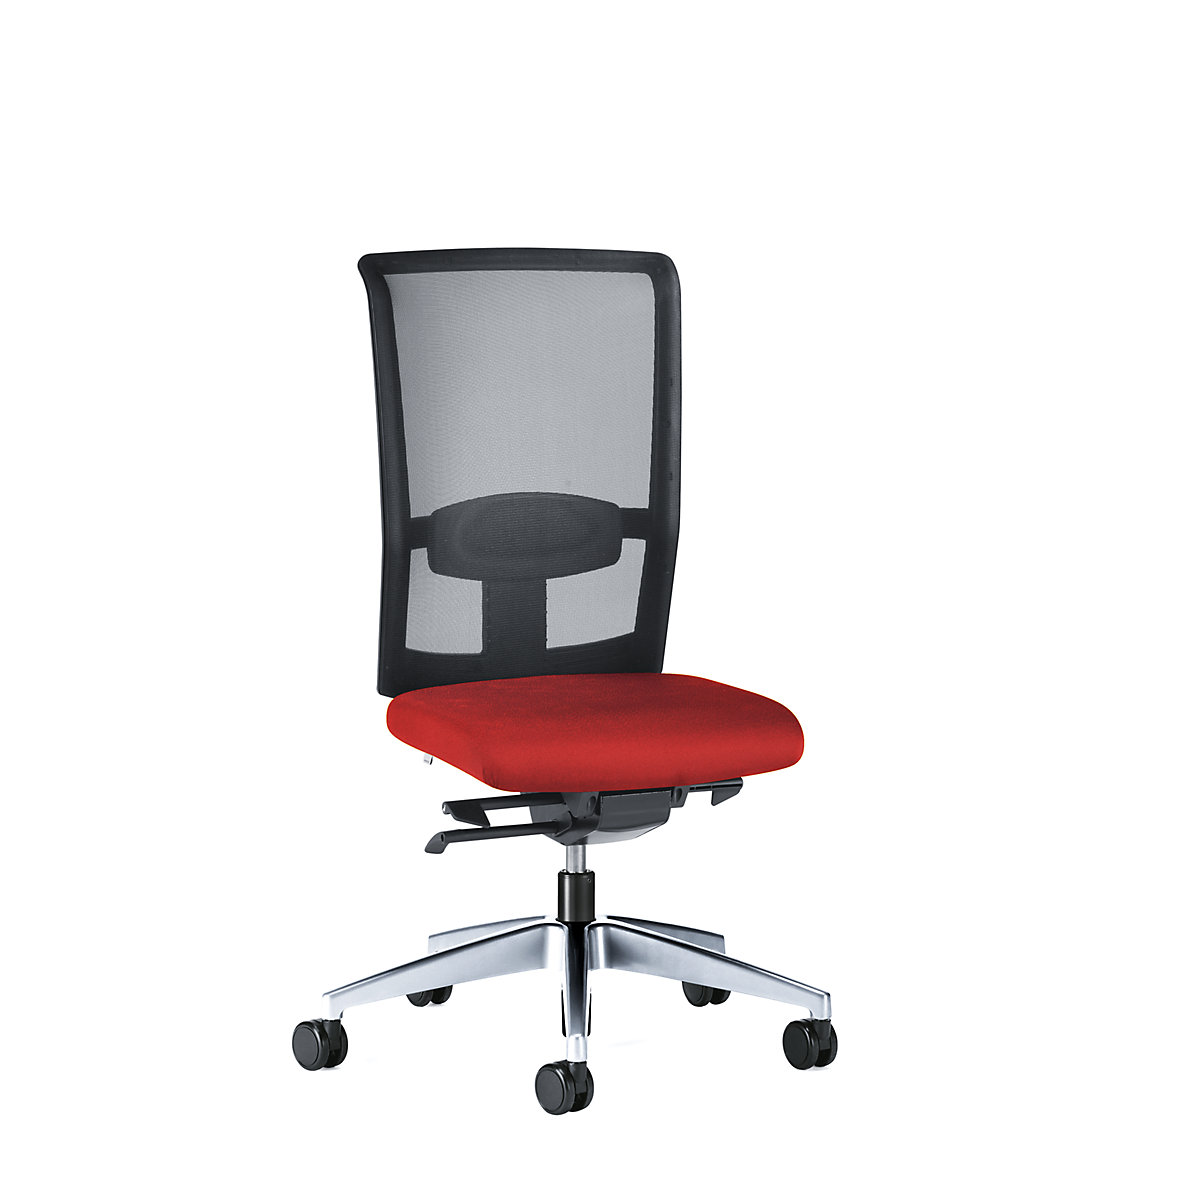 GOAL AIR office swivel chair, back rest height 545 mm – interstuhl, polished frame, with hard castors, flame red, seat depth 410 mm-6